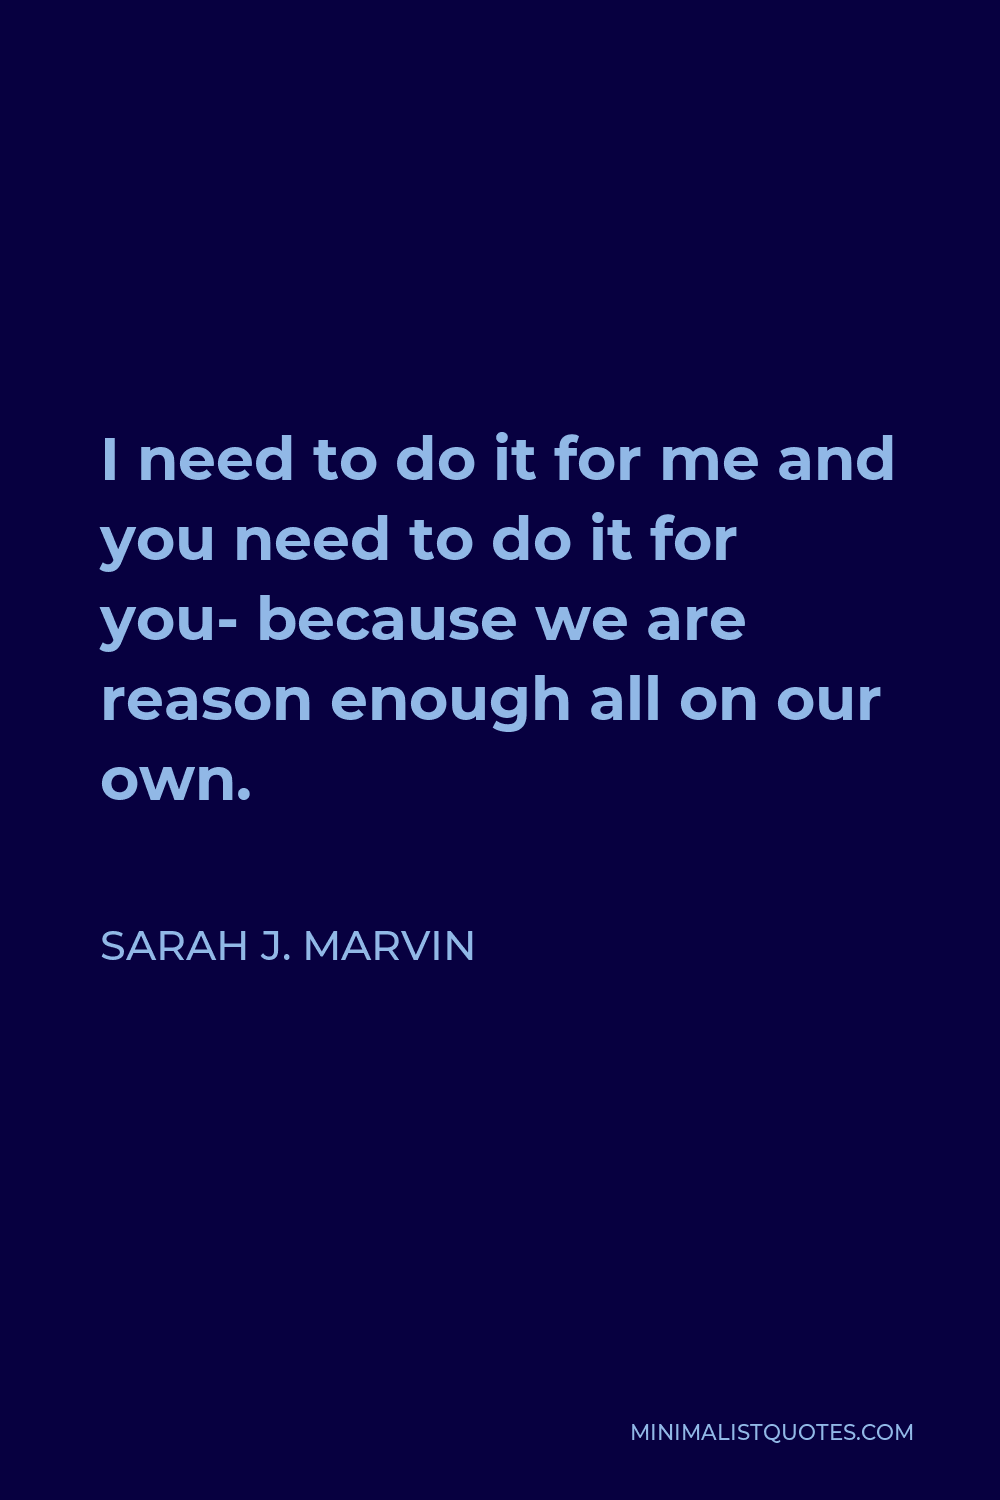 Sarah J. Marvin Quote - I need to do it for me and you need to do it for you- because we are reason enough all on our own.